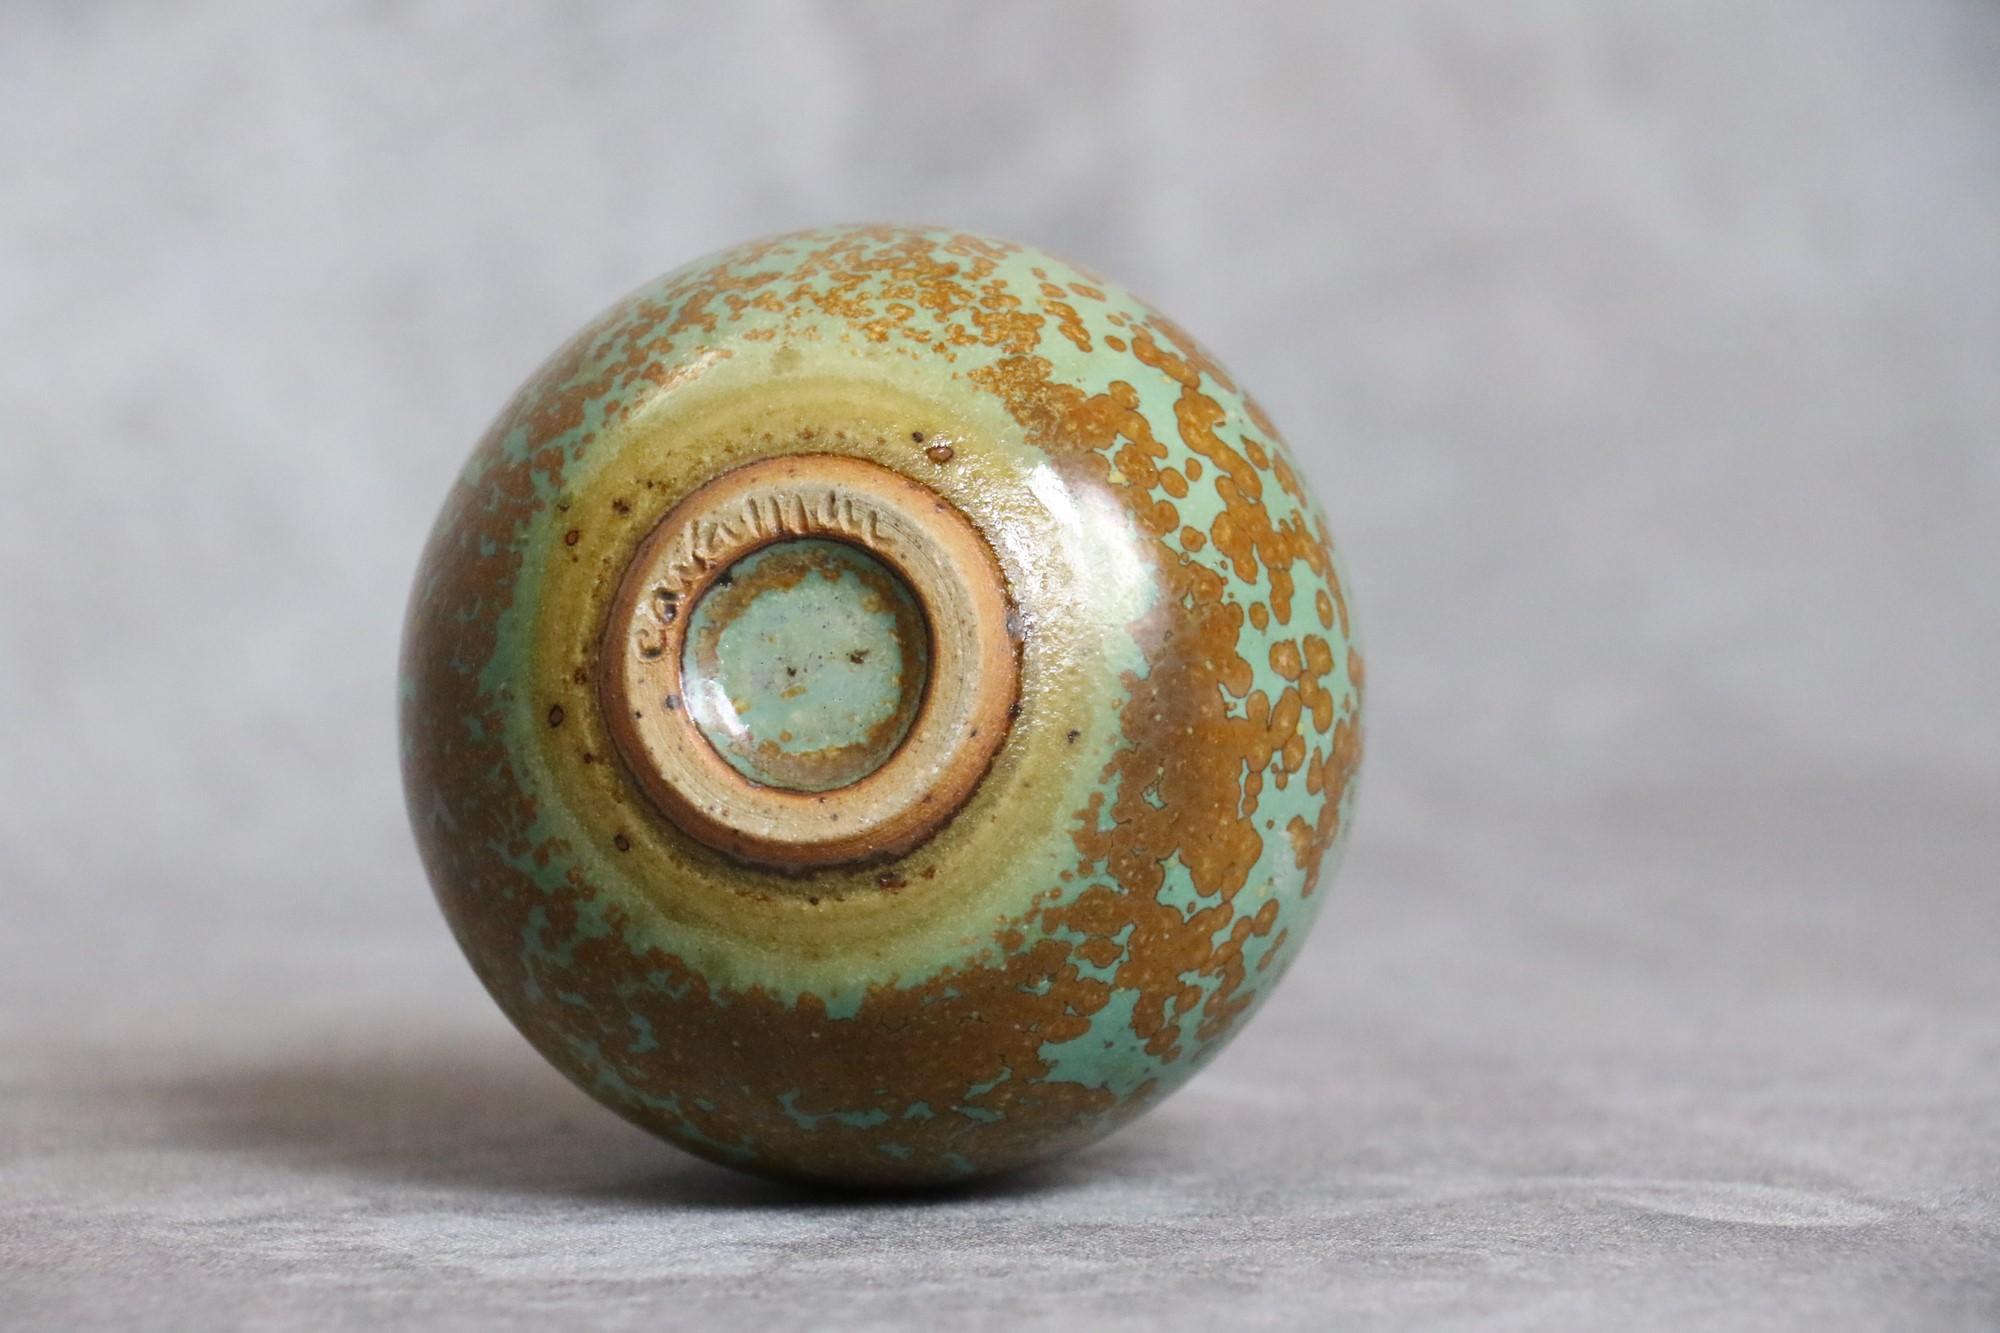 French Ceramic Ball Vase with Nucleations by Monique Cavallini - circa 2000 In Good Condition For Sale In Camblanes et Meynac, FR